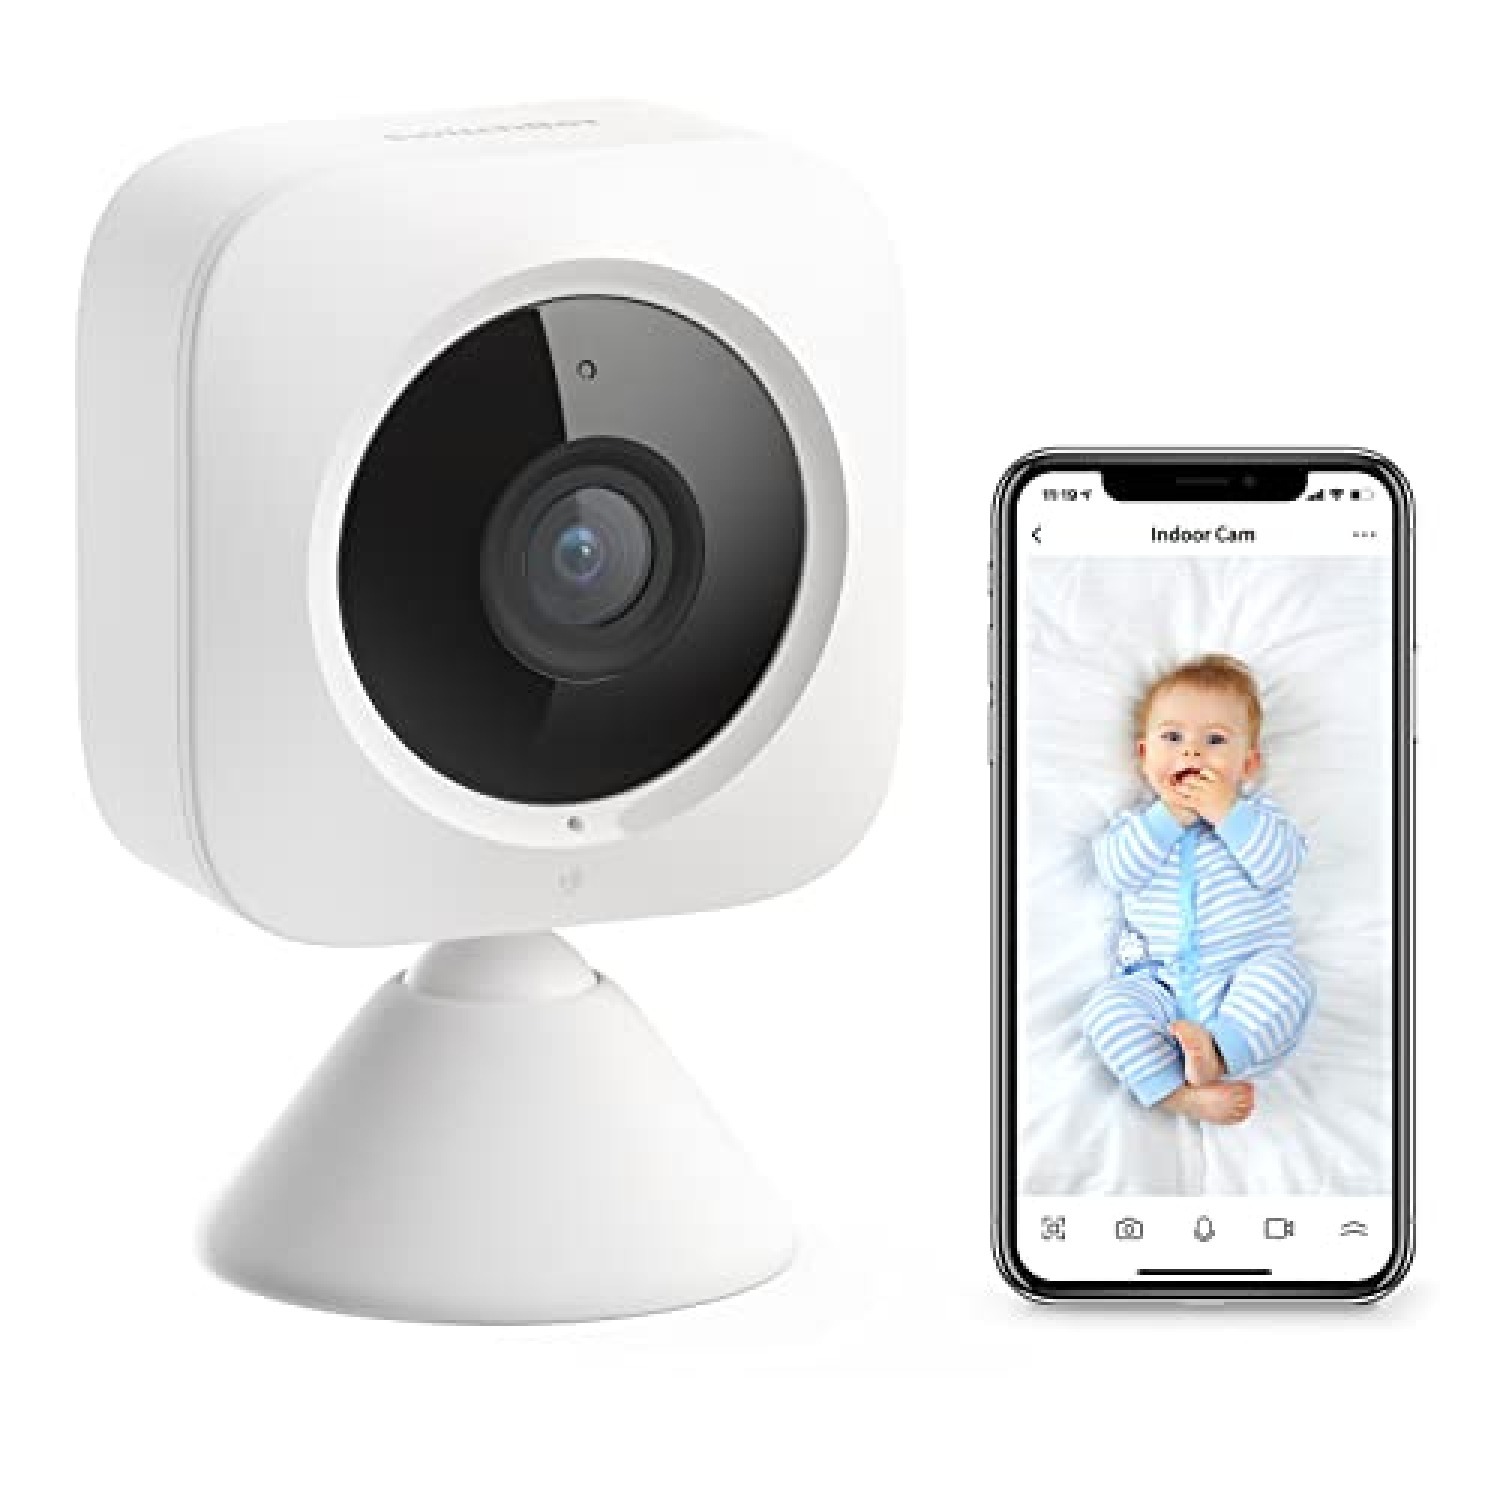 SwitchBot Security Indoor Camera, Motion Detection for Baby Monitor 1080P $14.99 + Free Shipping for Prime or orders $25+